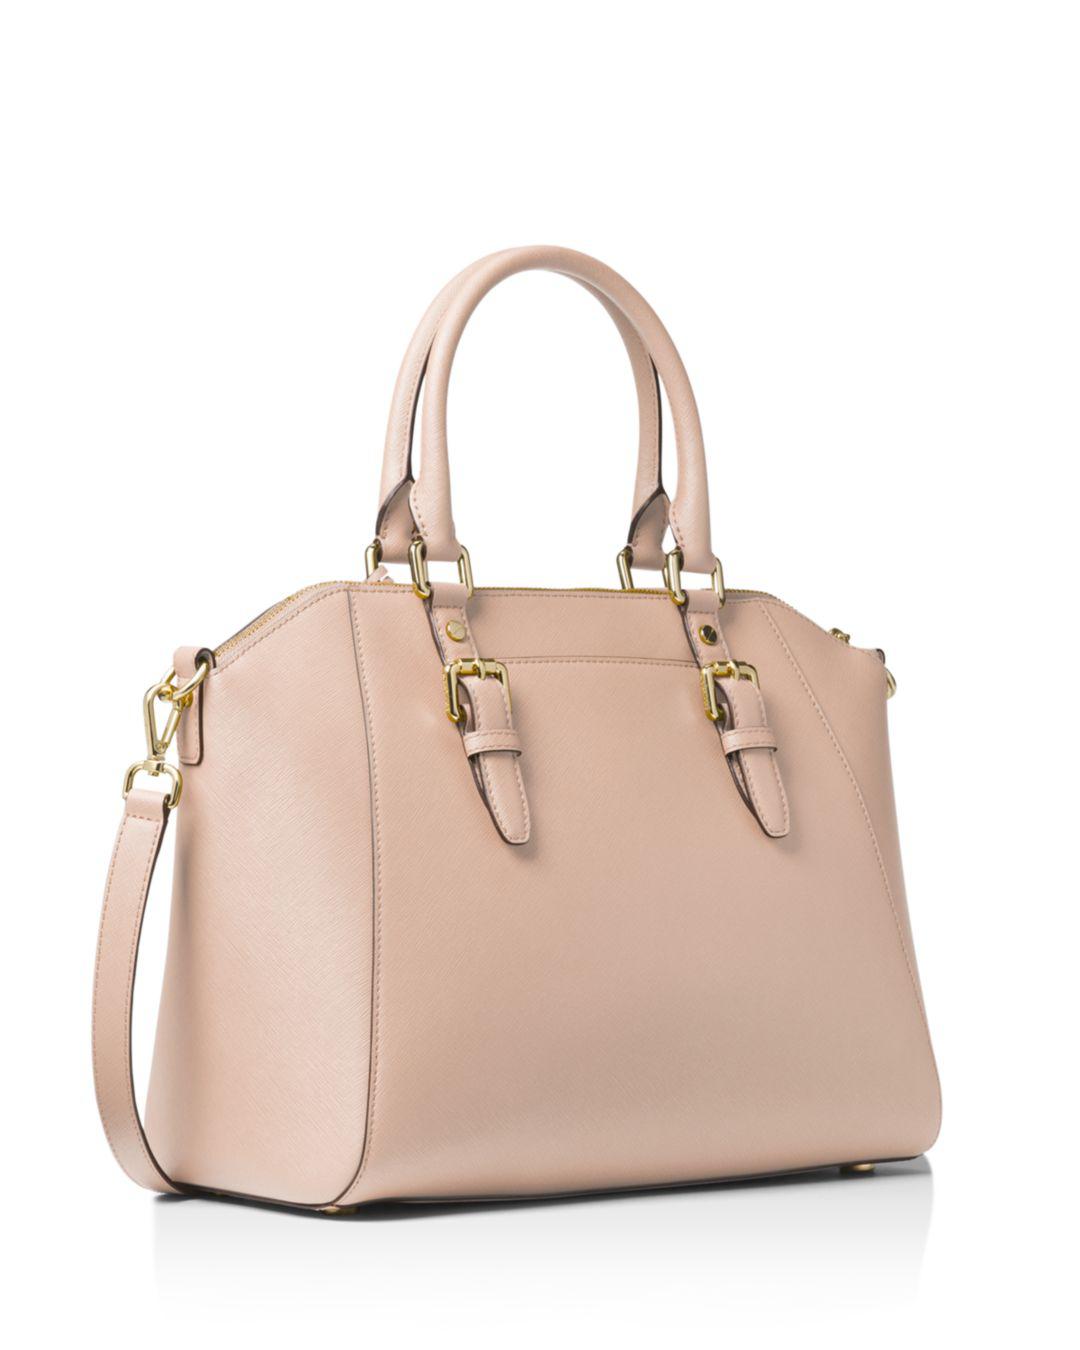 MICHAEL Michael Kors Ciara Large Saffiano Leather Satchel in Soft Pink ...